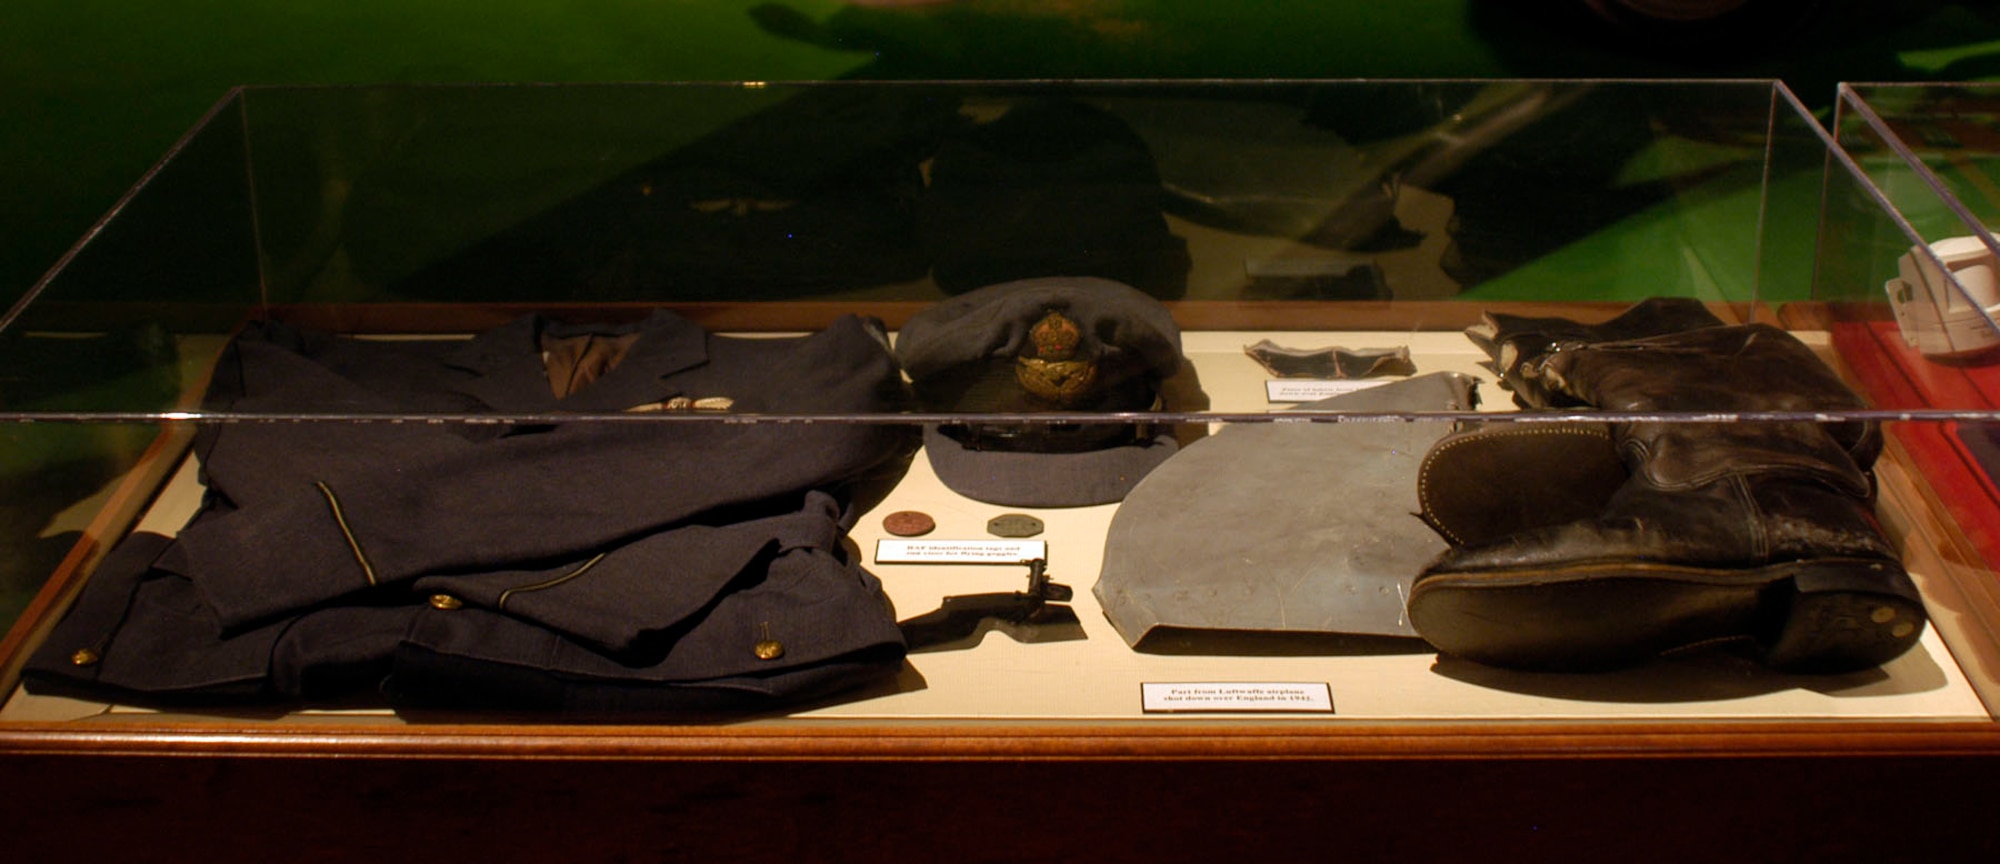 DAYTON, Ohio -- Royal Air Force uniform displayed in the Early Years Gallery at the National Museum of the U.S. Air Force. (U.S. Air Force photo)